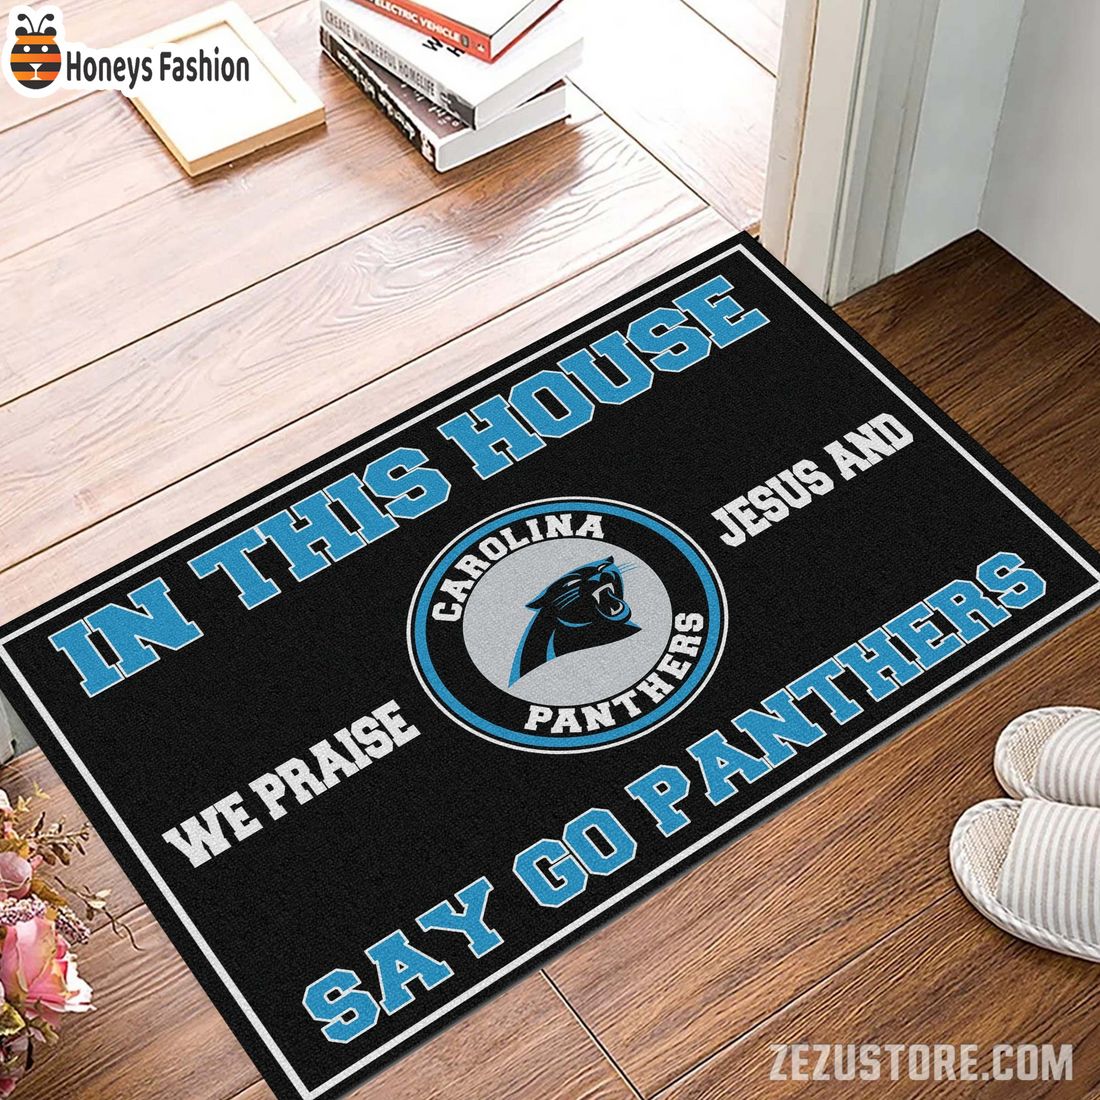 In this house we praise jesus and say go Panthers doormat